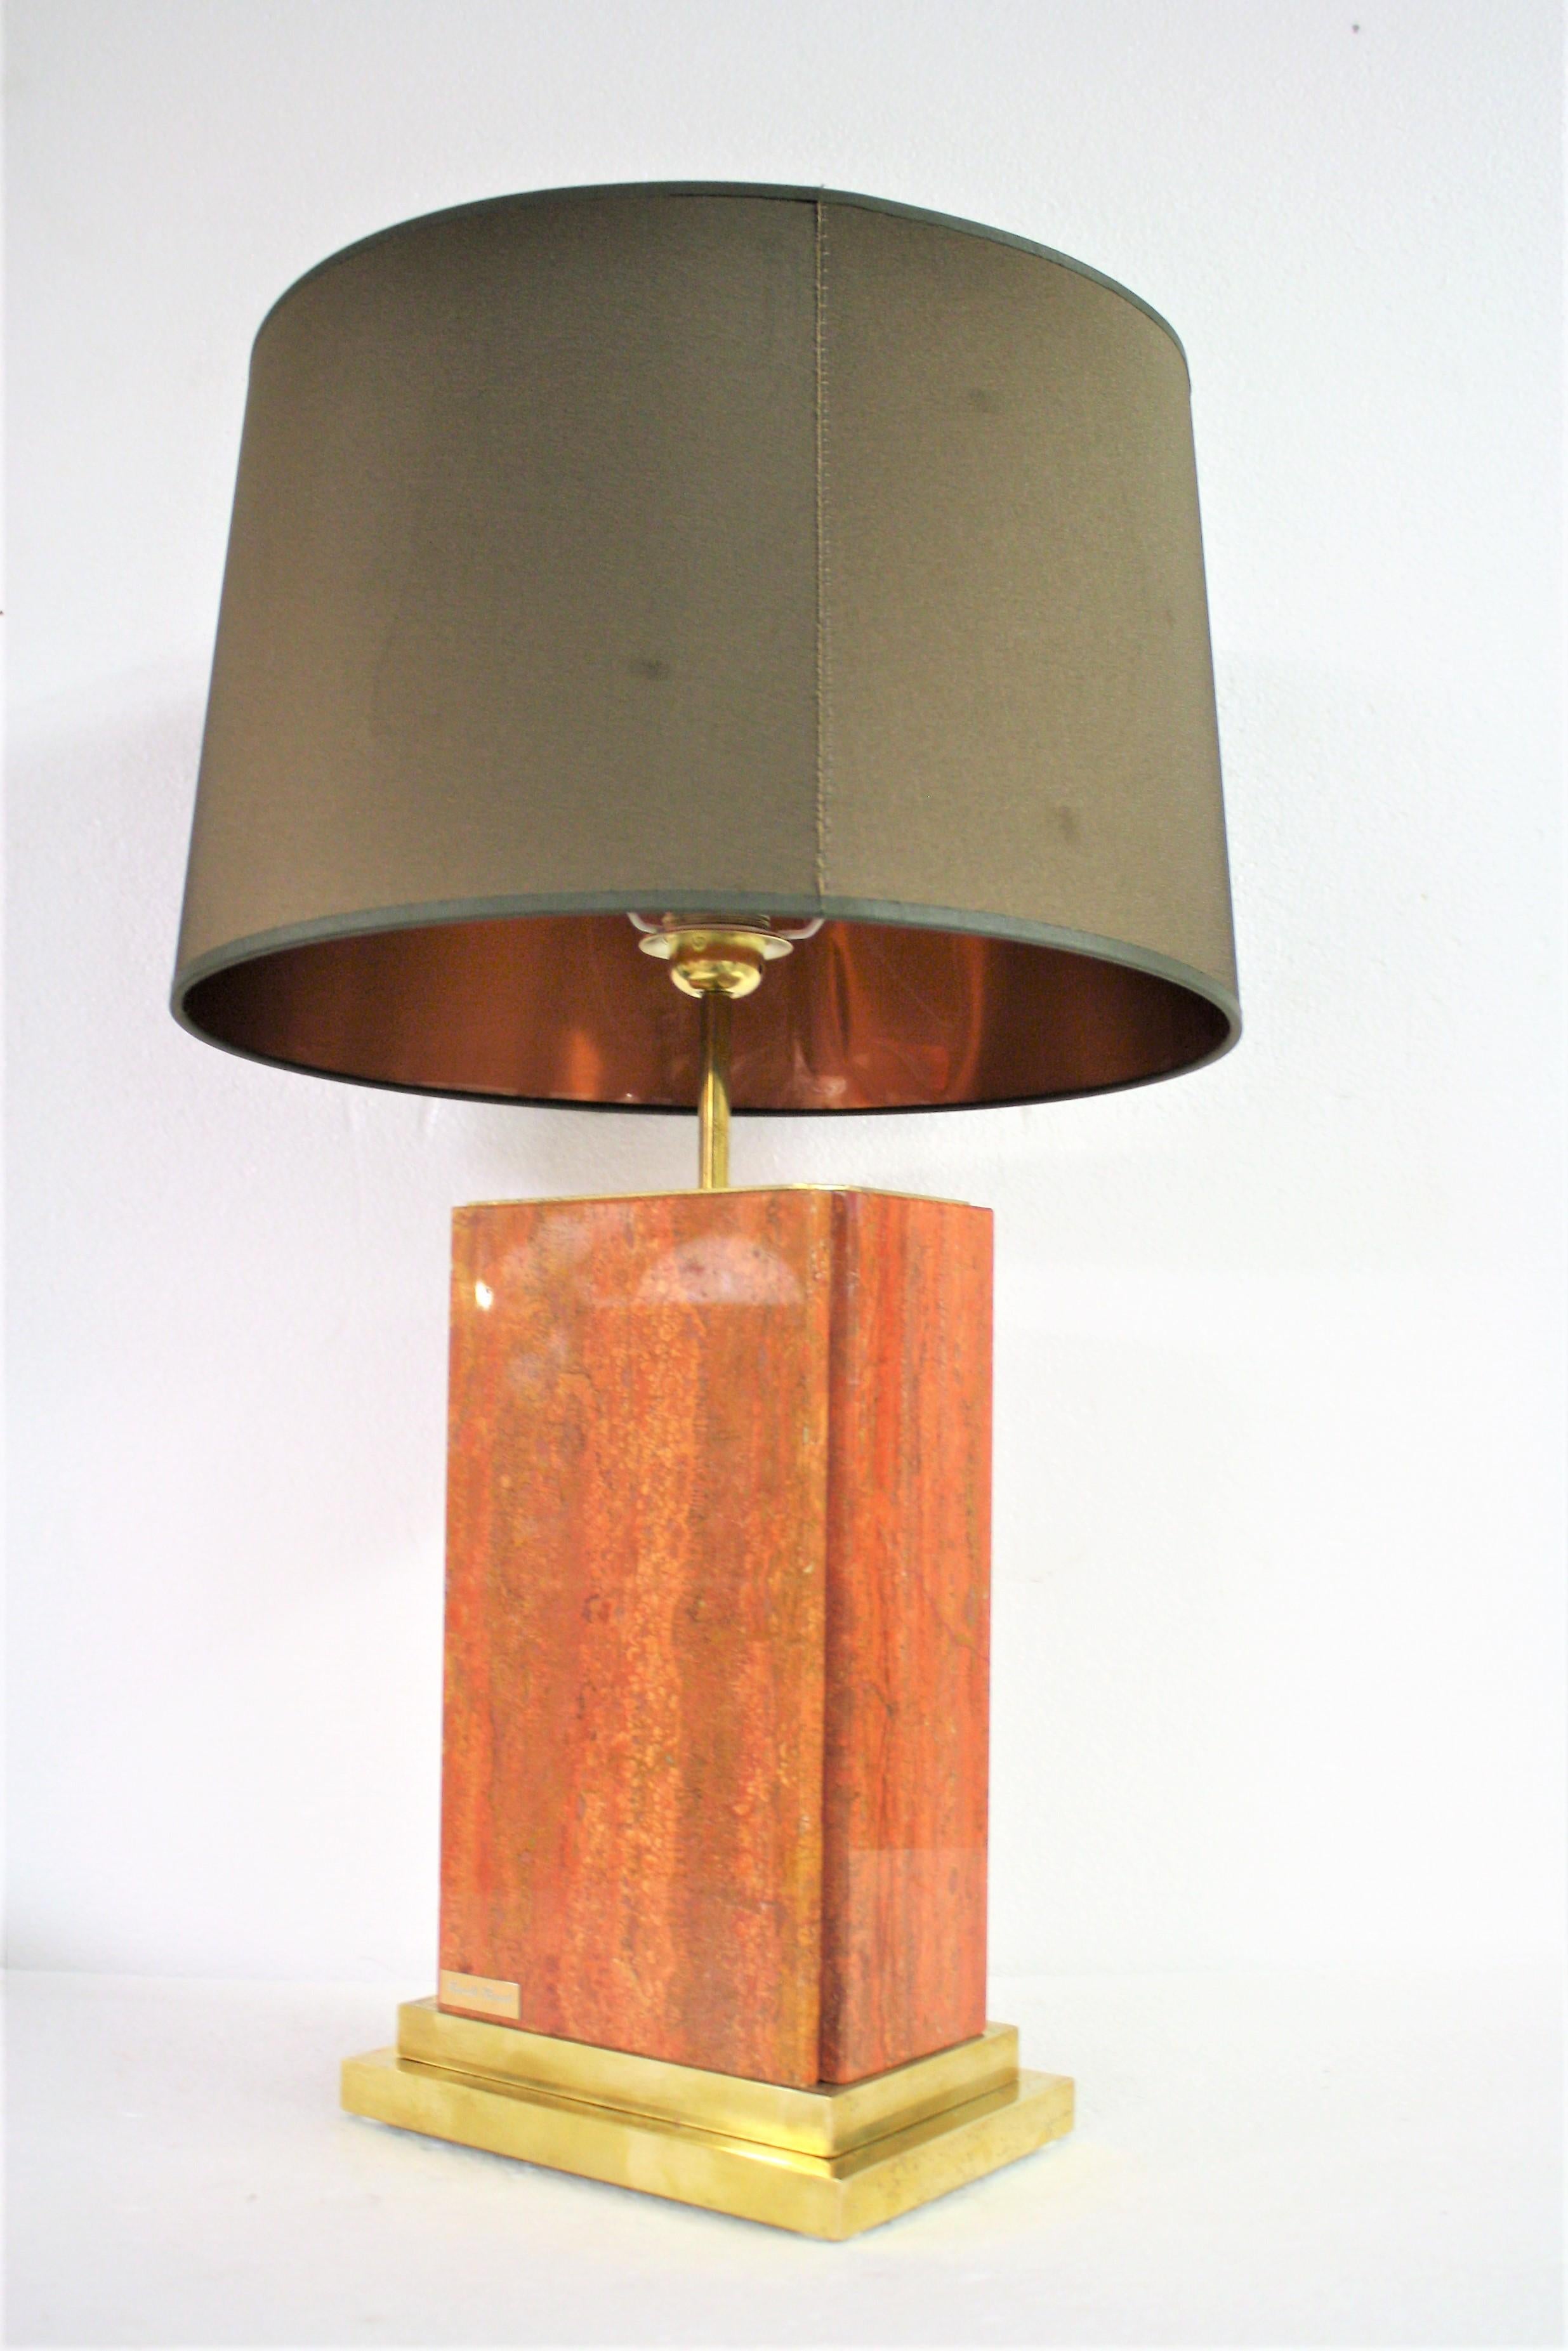 Large orange marble table lamp with brass.

The lamp was designed and manufactured by Belgian artisan Camille Breesch.

All Breesch's lamps usually came with travertine or carrara marble stone from Italy.

This large example has a rare orange